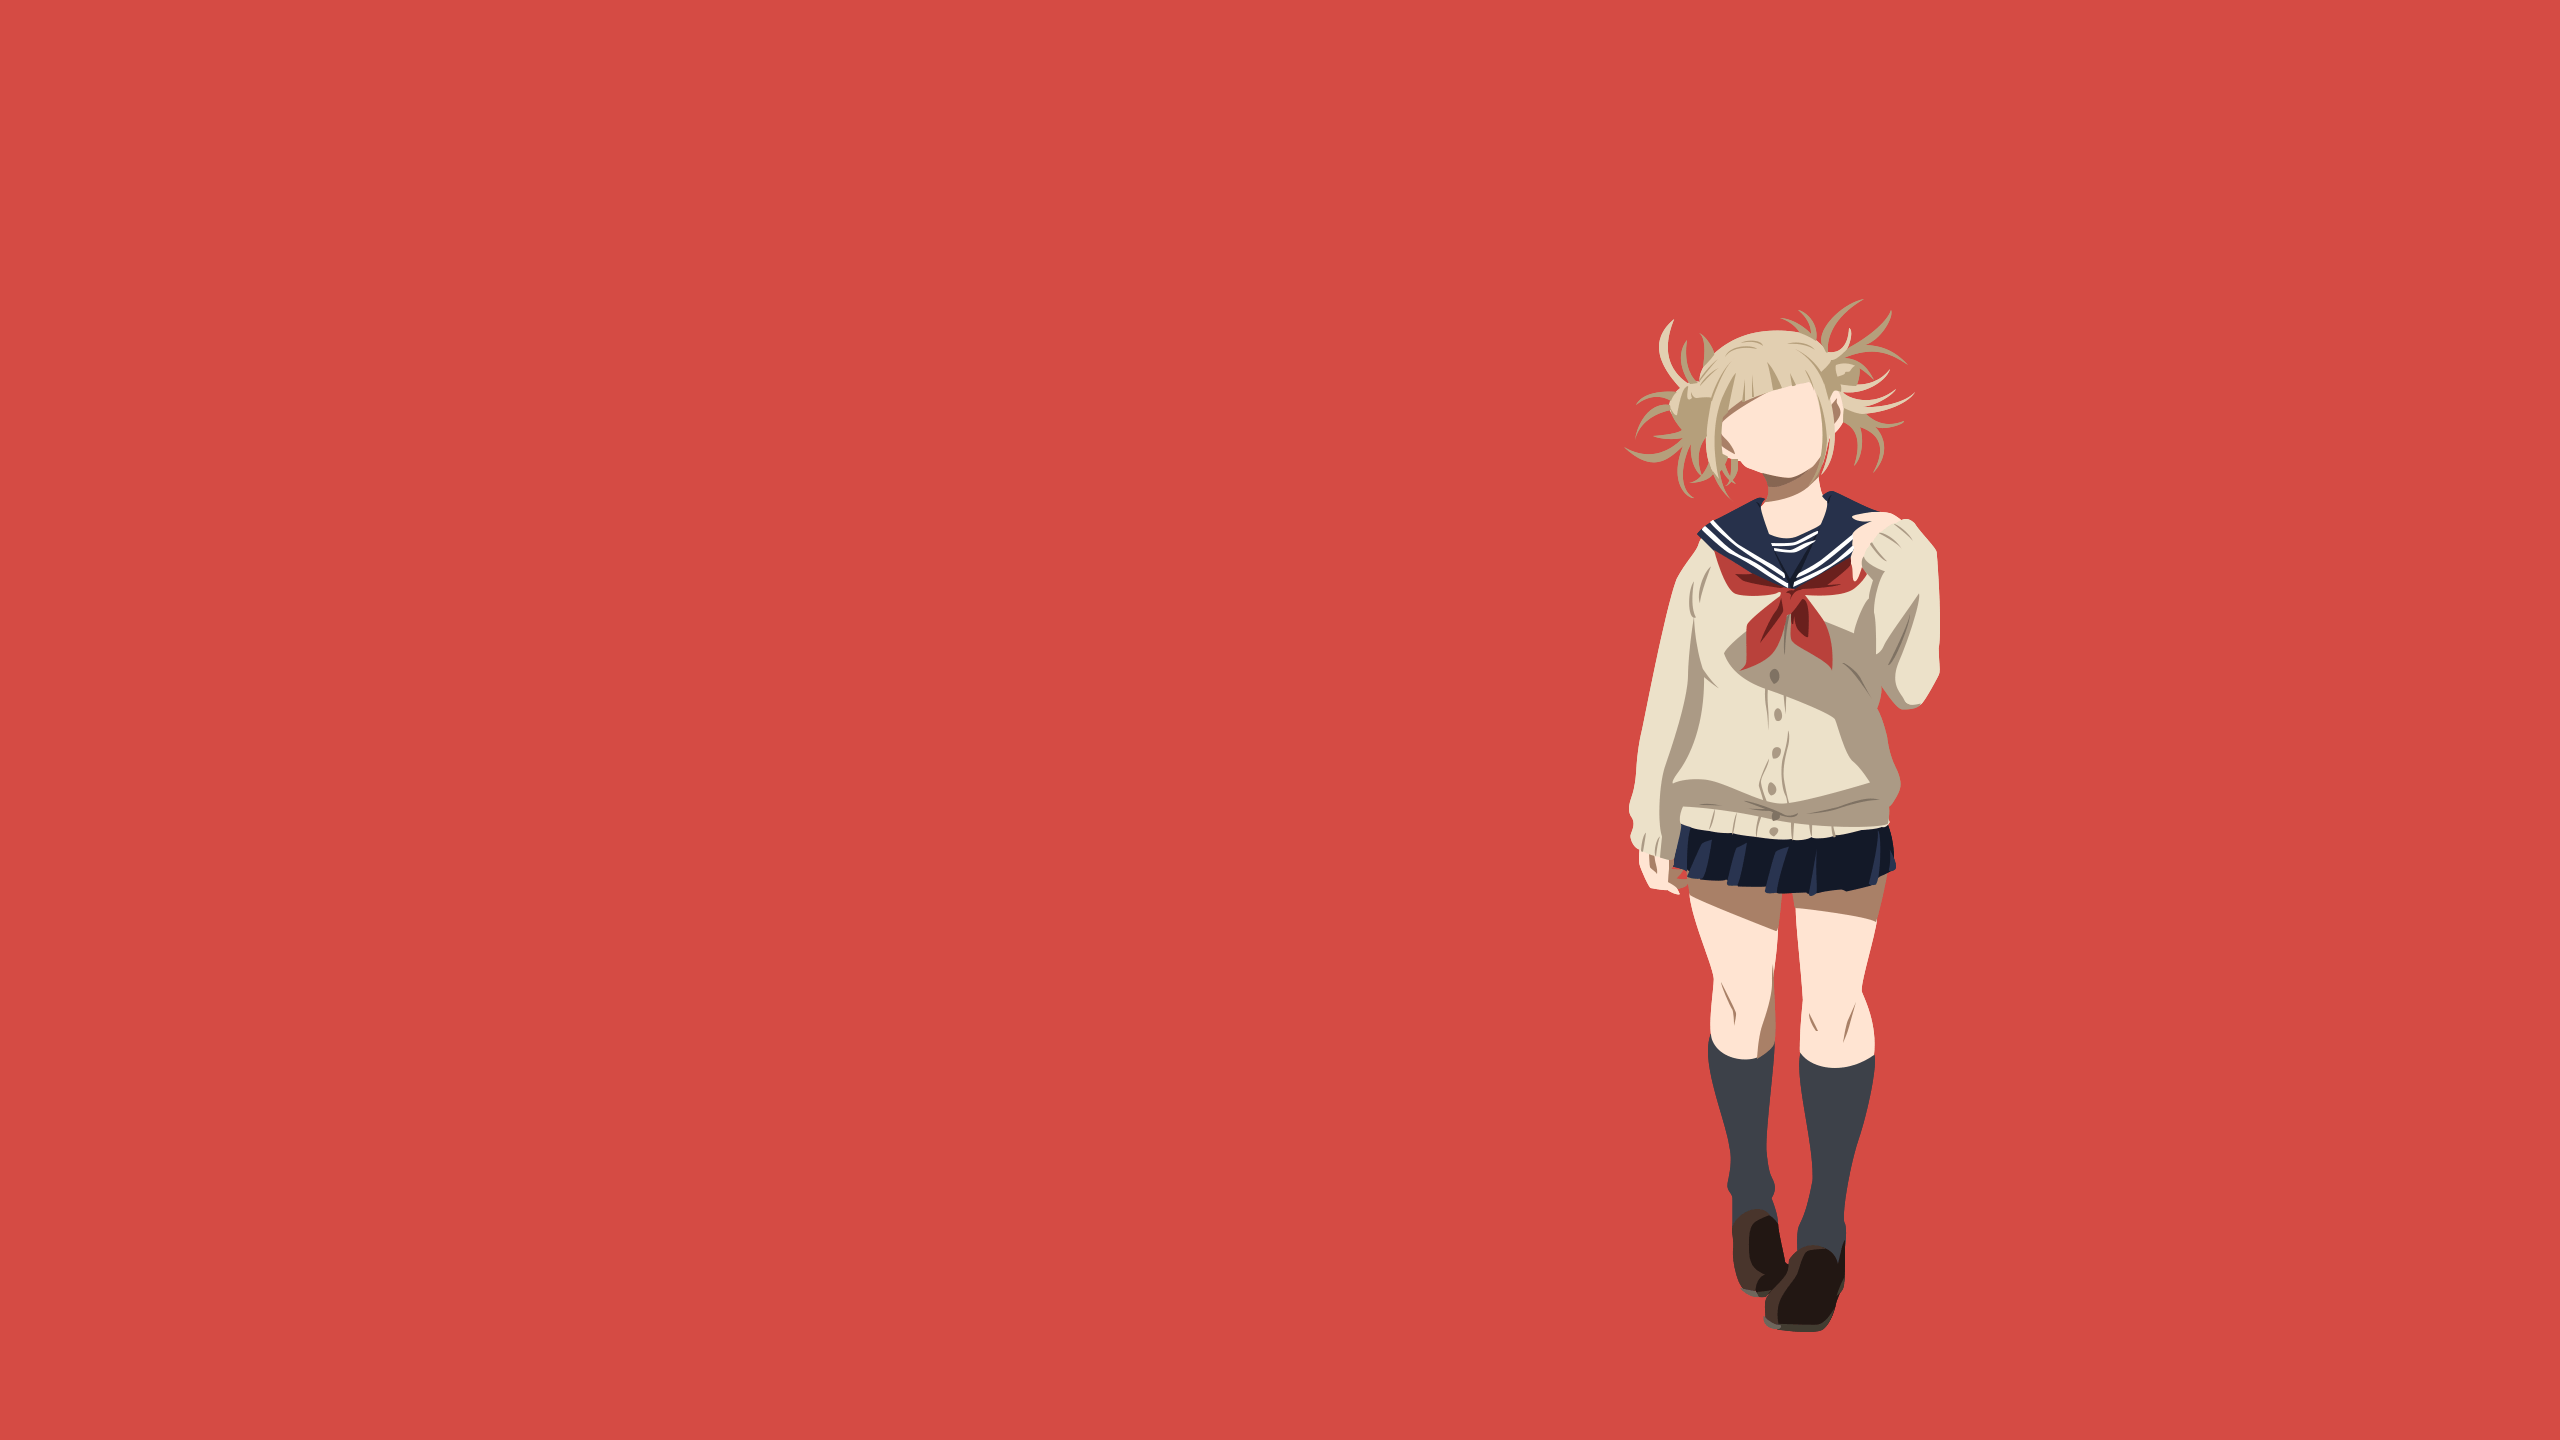 Toga Aesthetic Laptop Wallpapers - Wallpaper Cave.